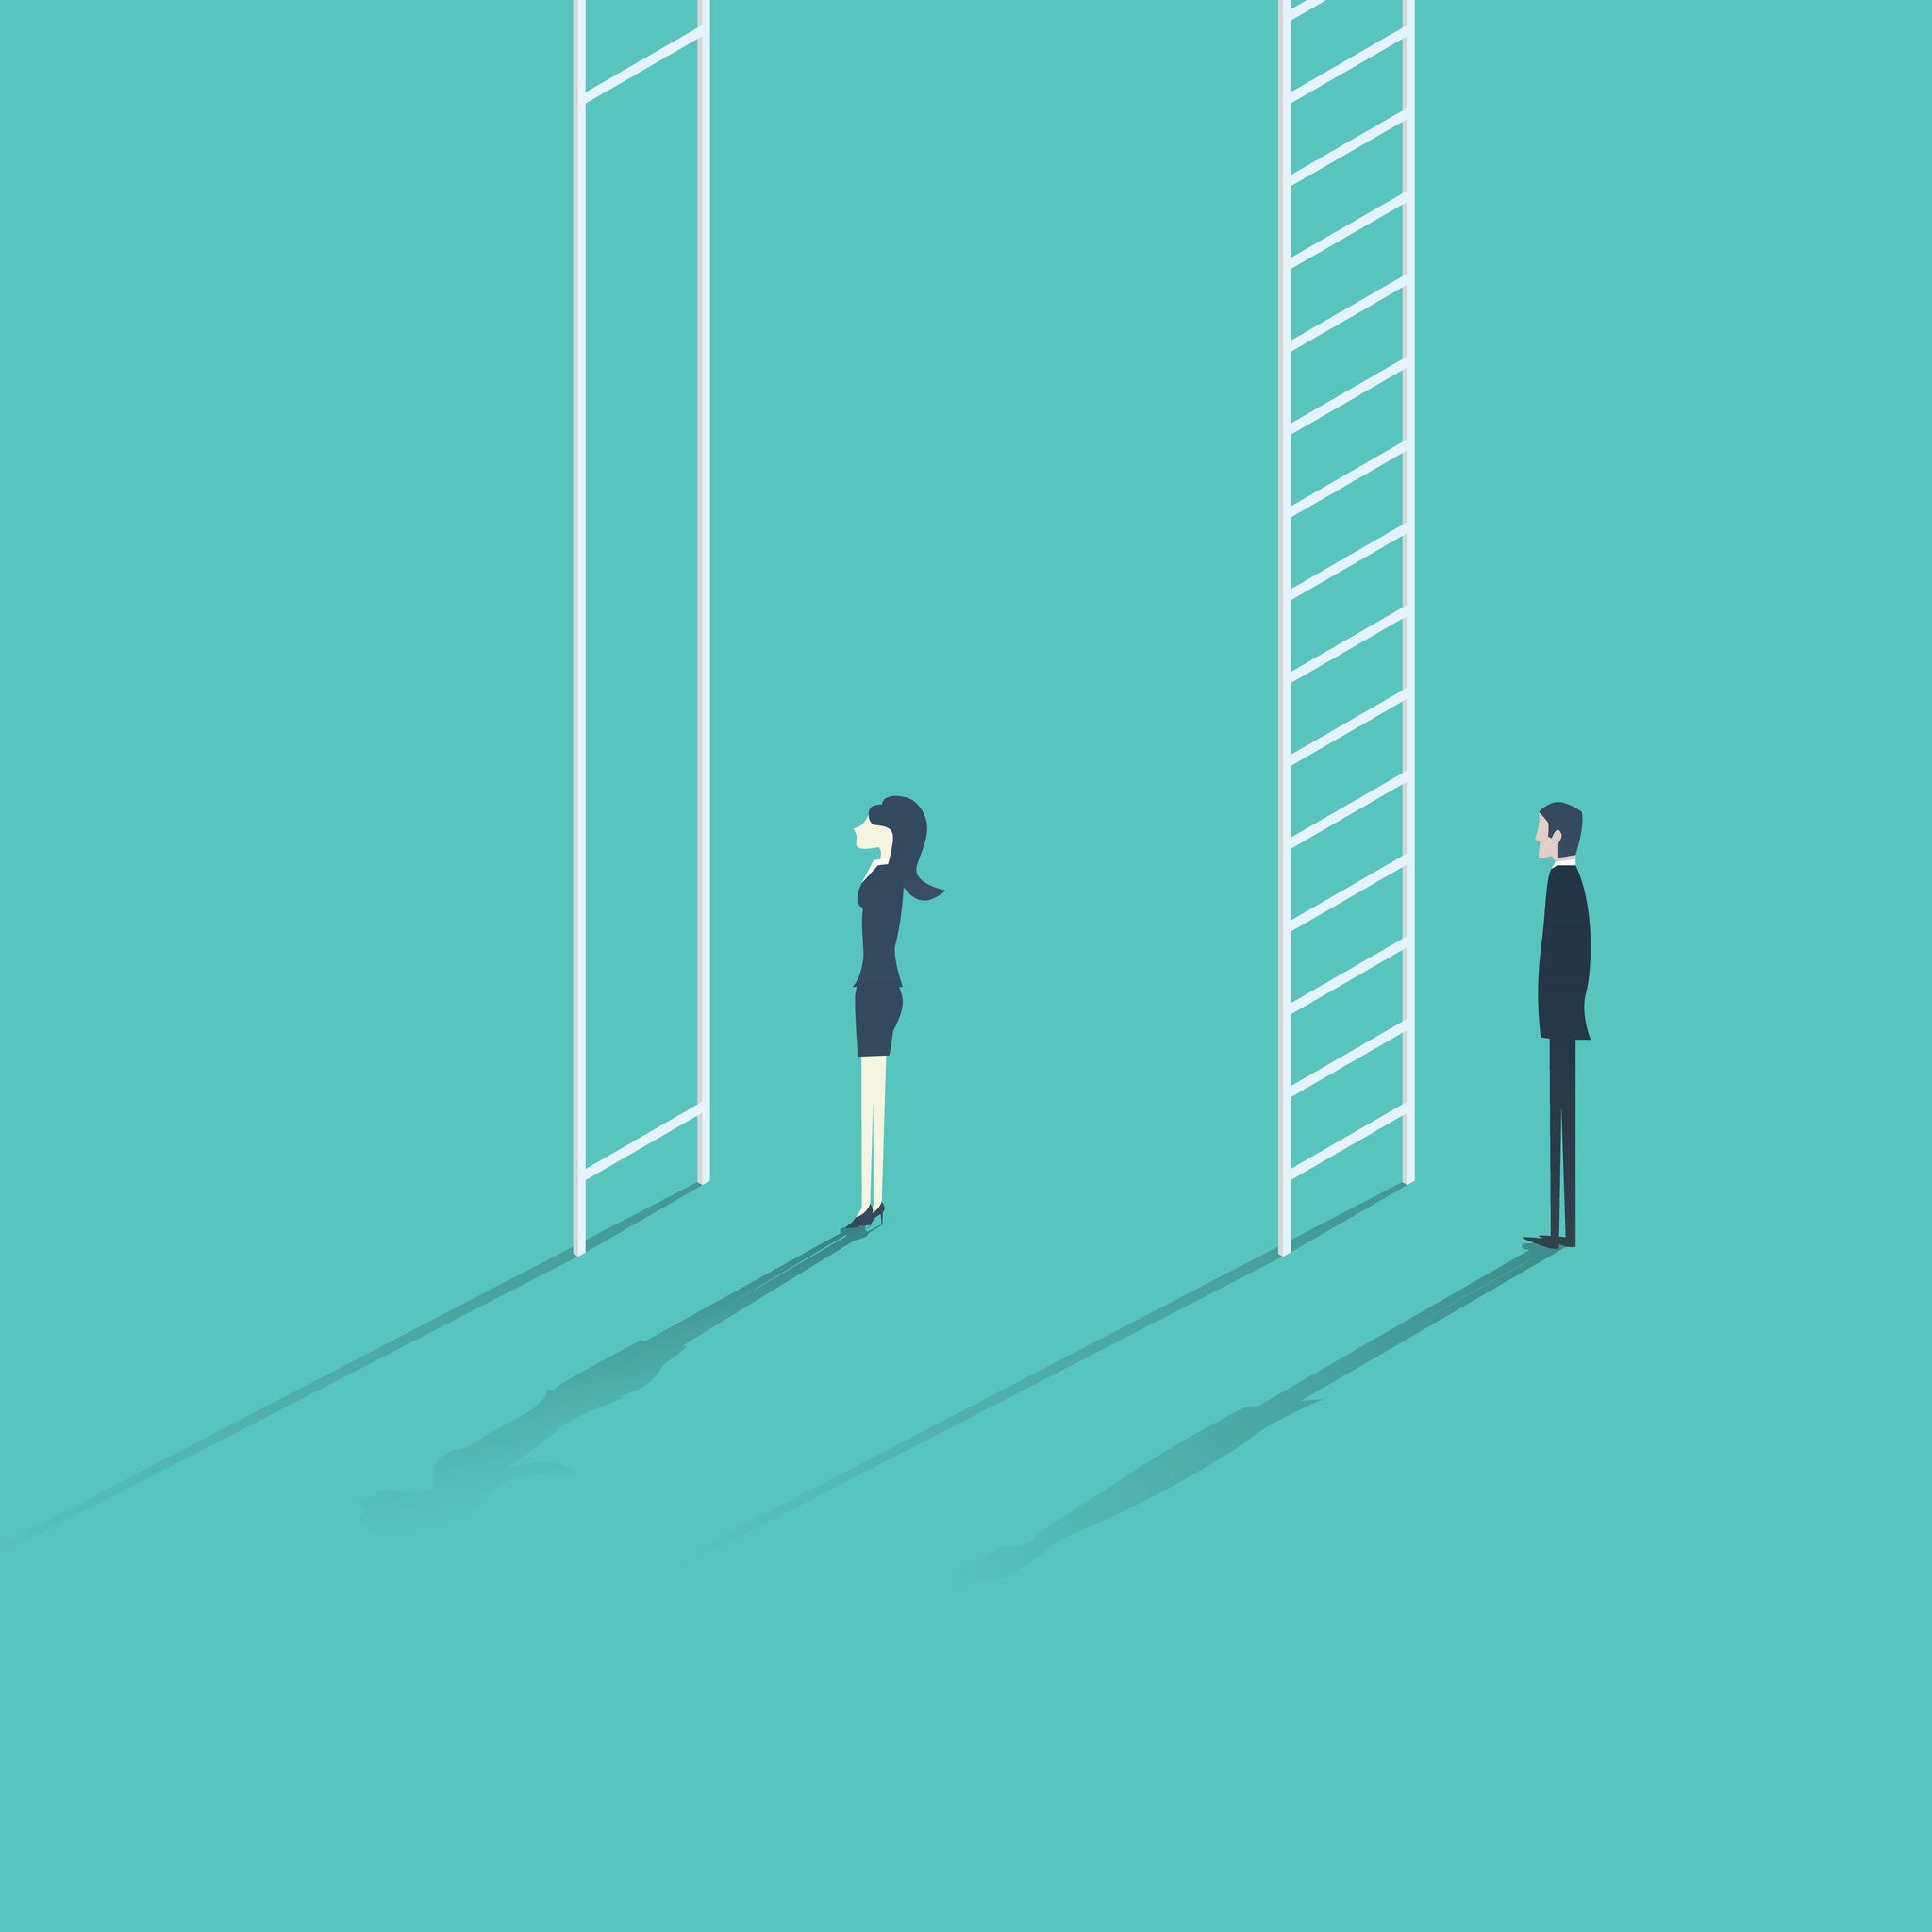 Cartoon of a woman standing in front of a broken ladder, next to a man standing in front of a normal ladder.